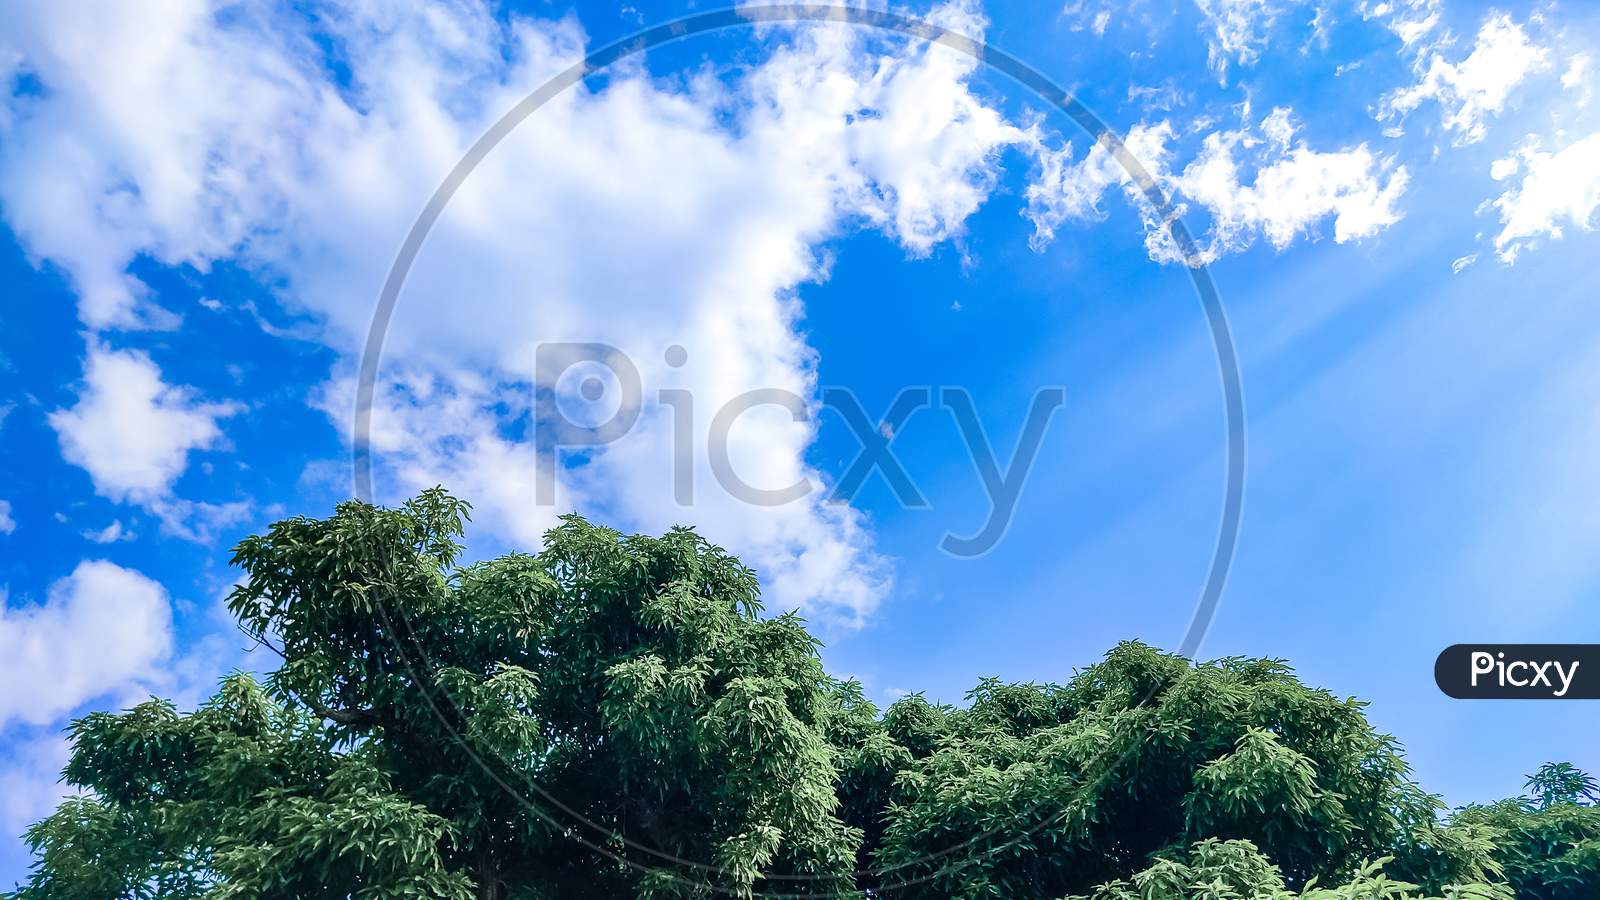 Landscape view of Green tree is in the background of clear blue sky with clouds.